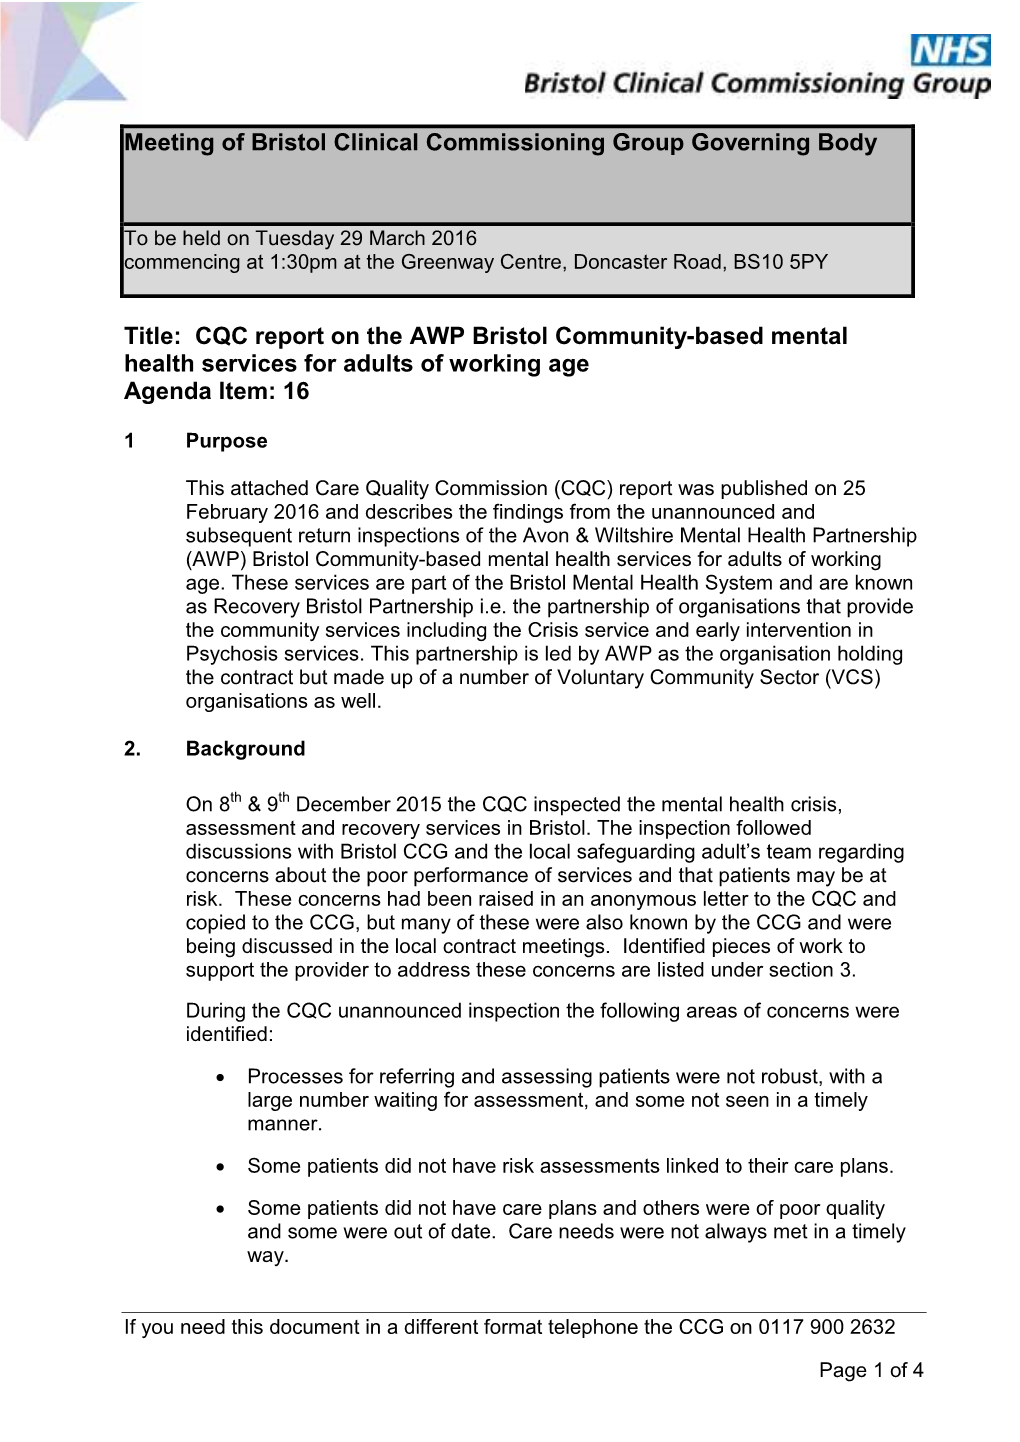 Title: CQC Report on the AWP Bristol Community-Based Mental Health Services for Adults of Working Age Agenda Item: 16